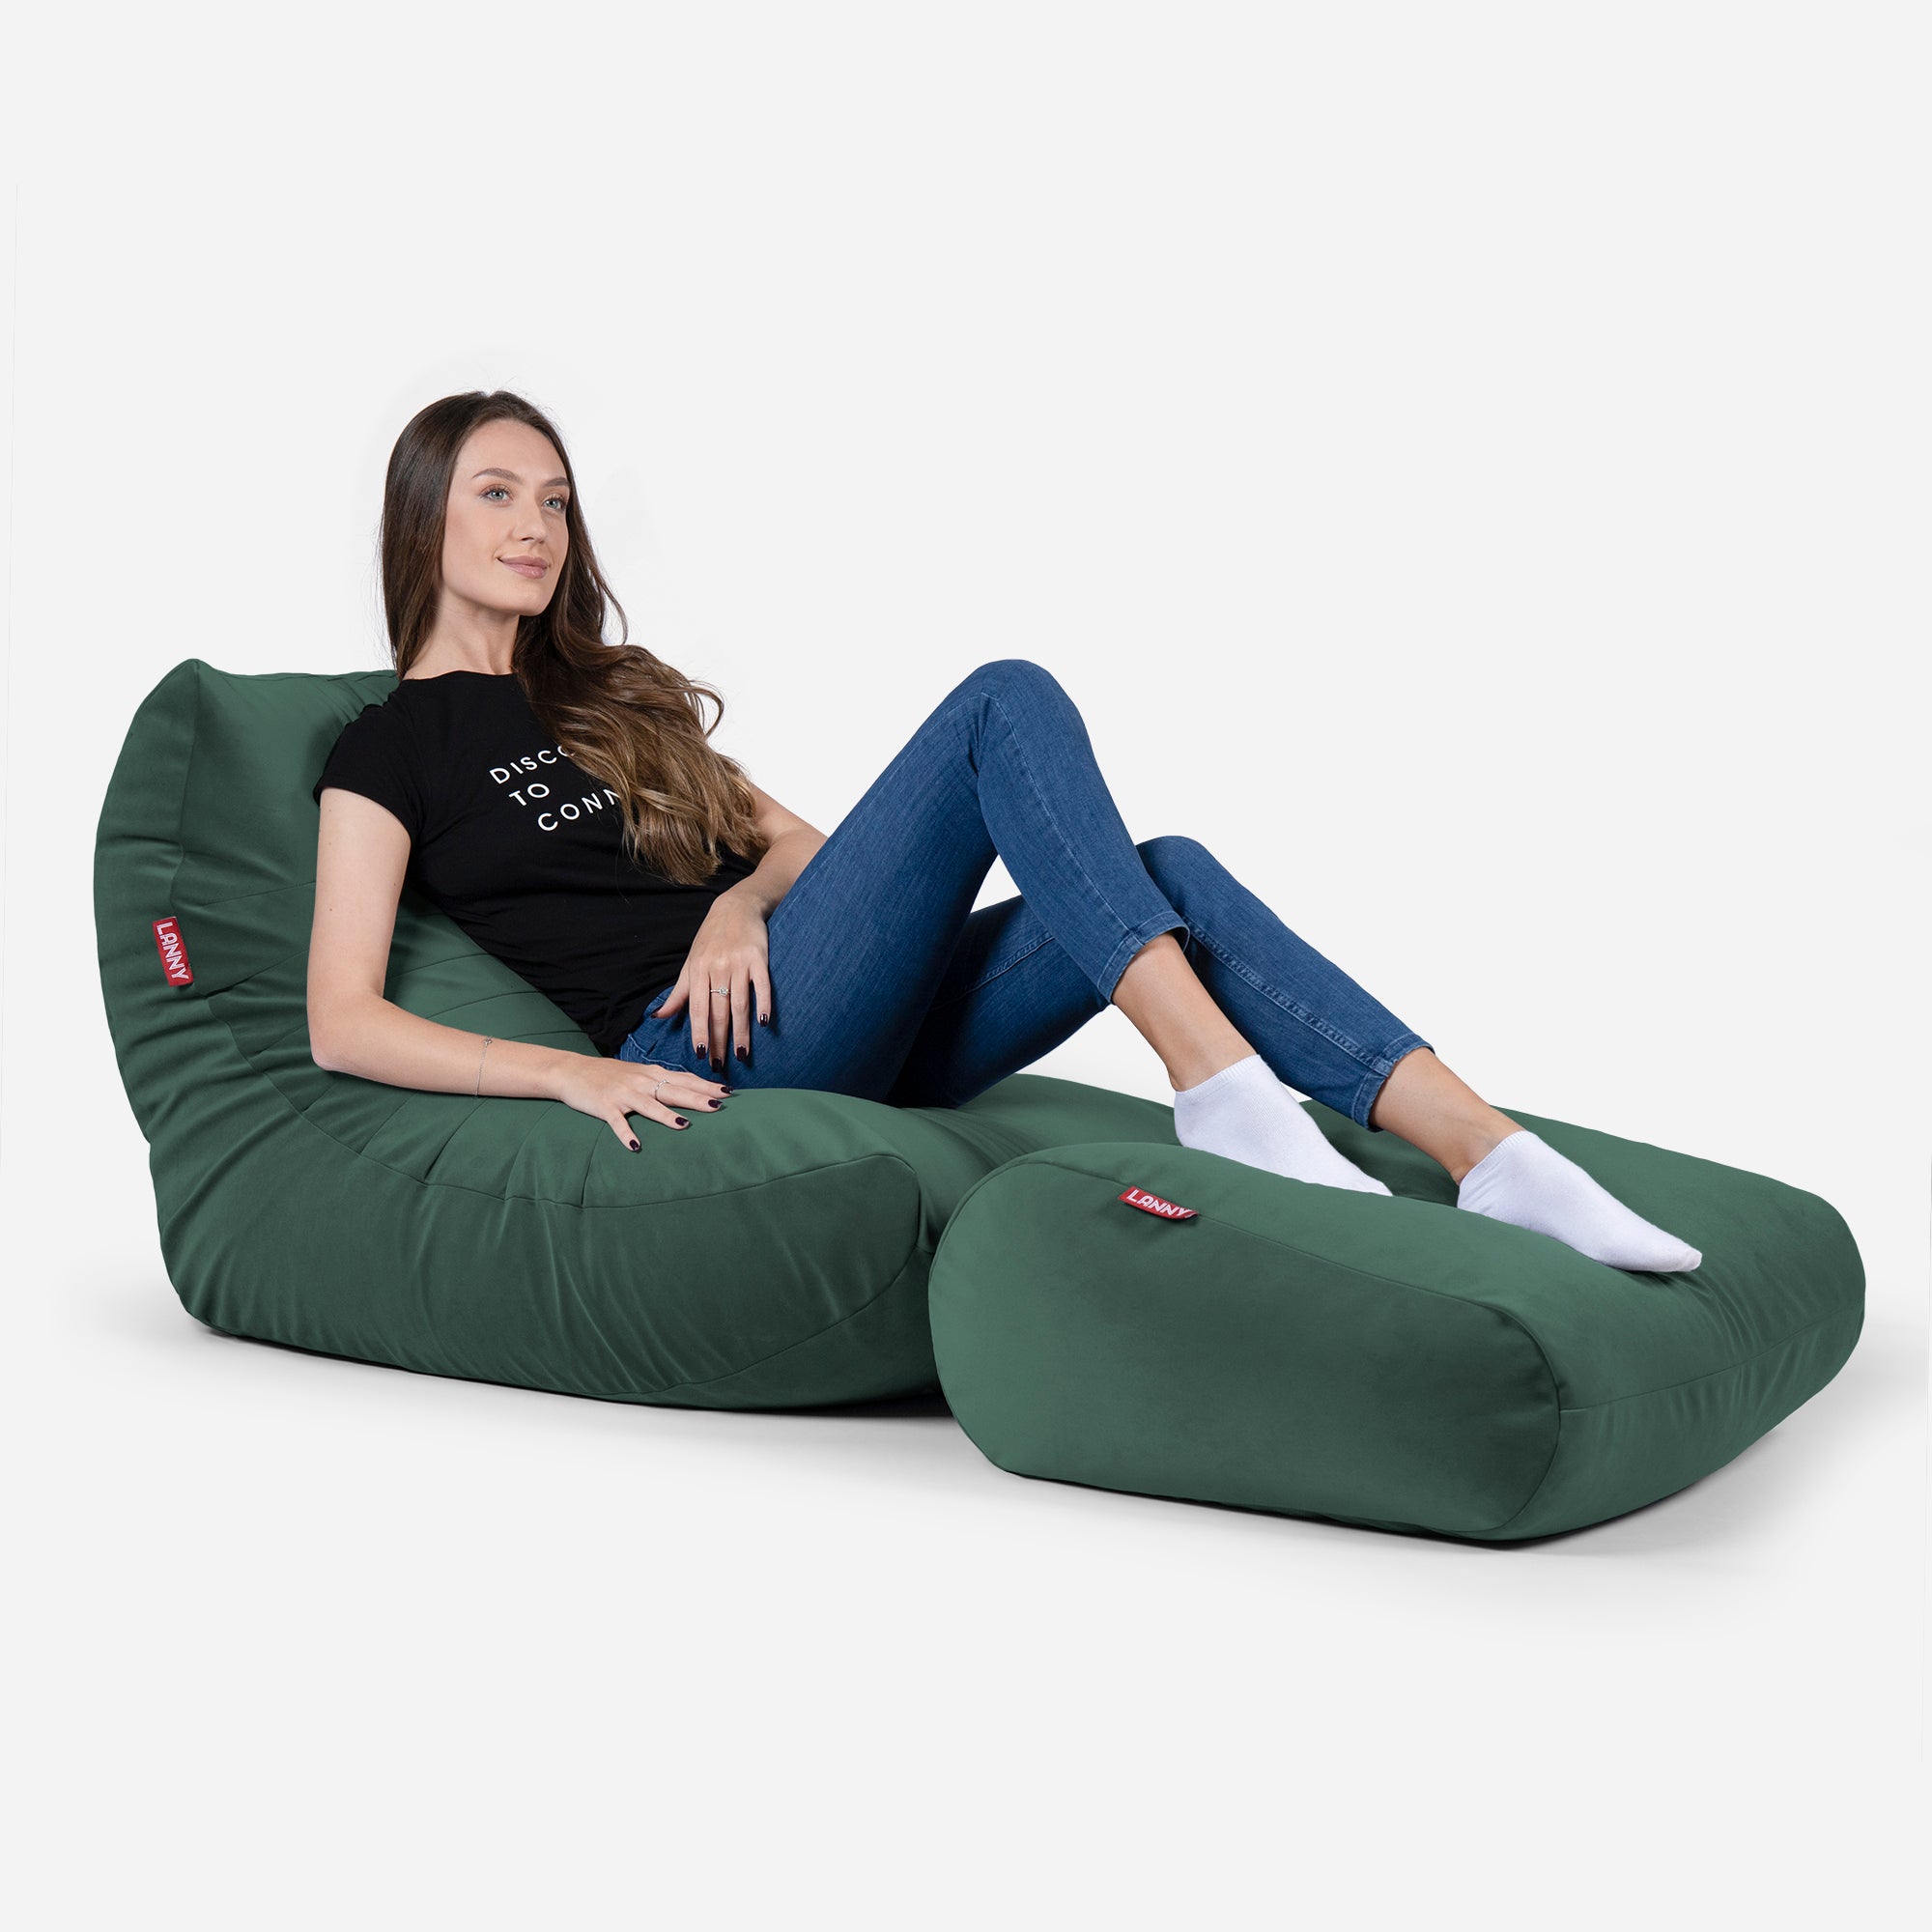 Beanbag Curvy Design Green color with girl seating on it